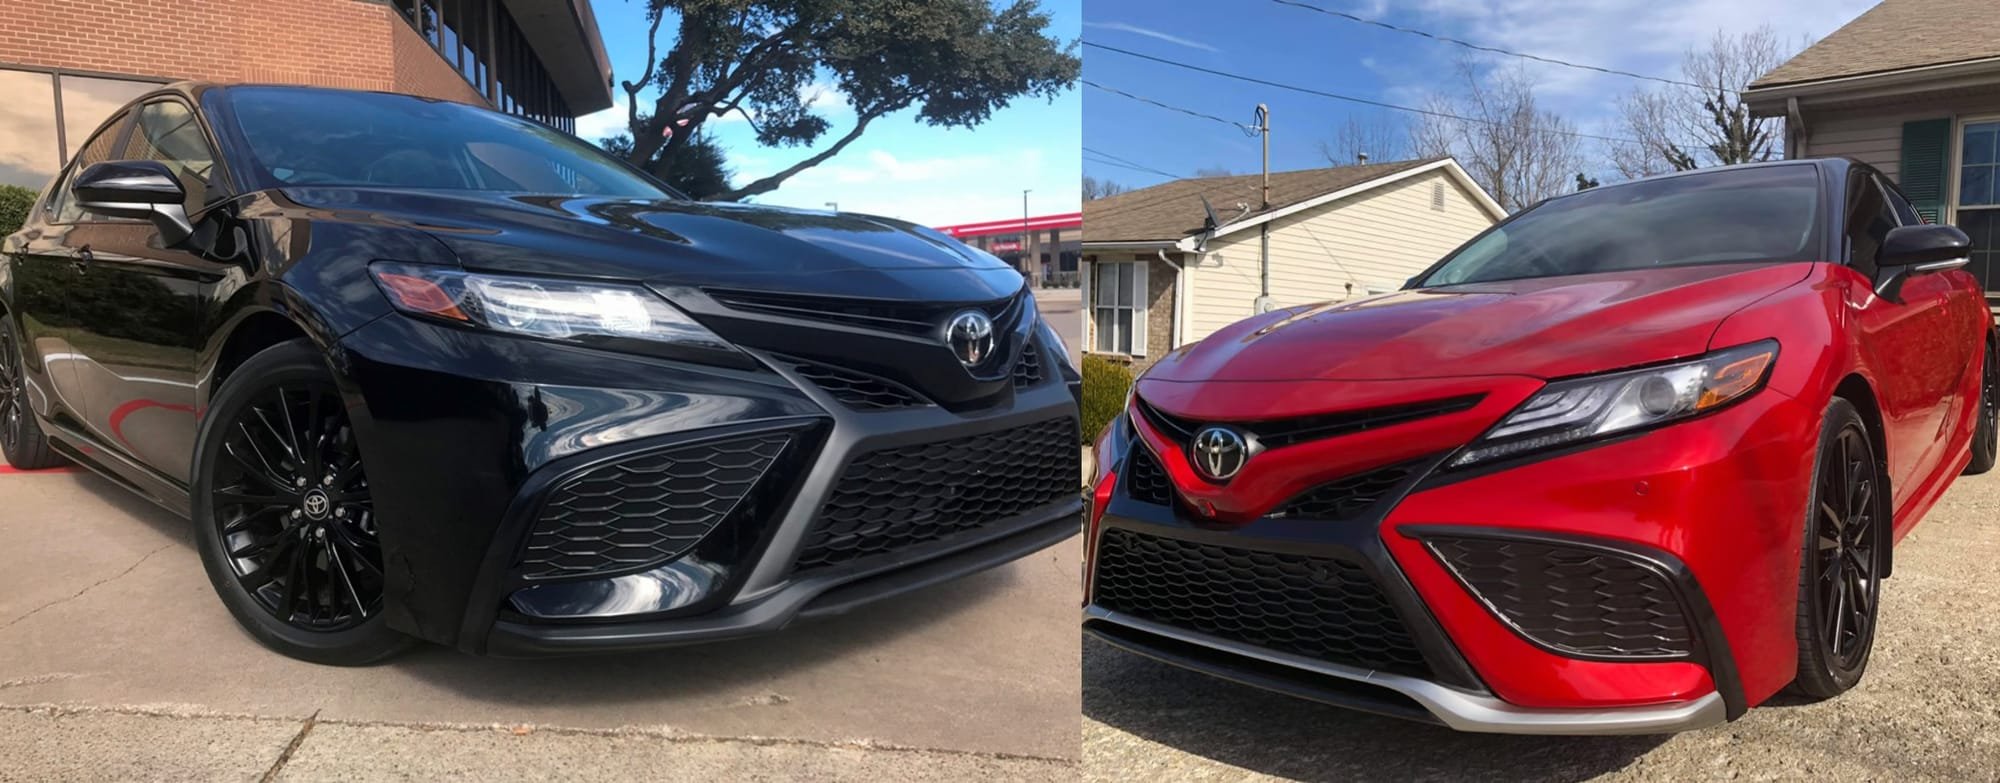 2021 Toyota Camry SE Vs XSE A Comprehensive Comparison For Discerning